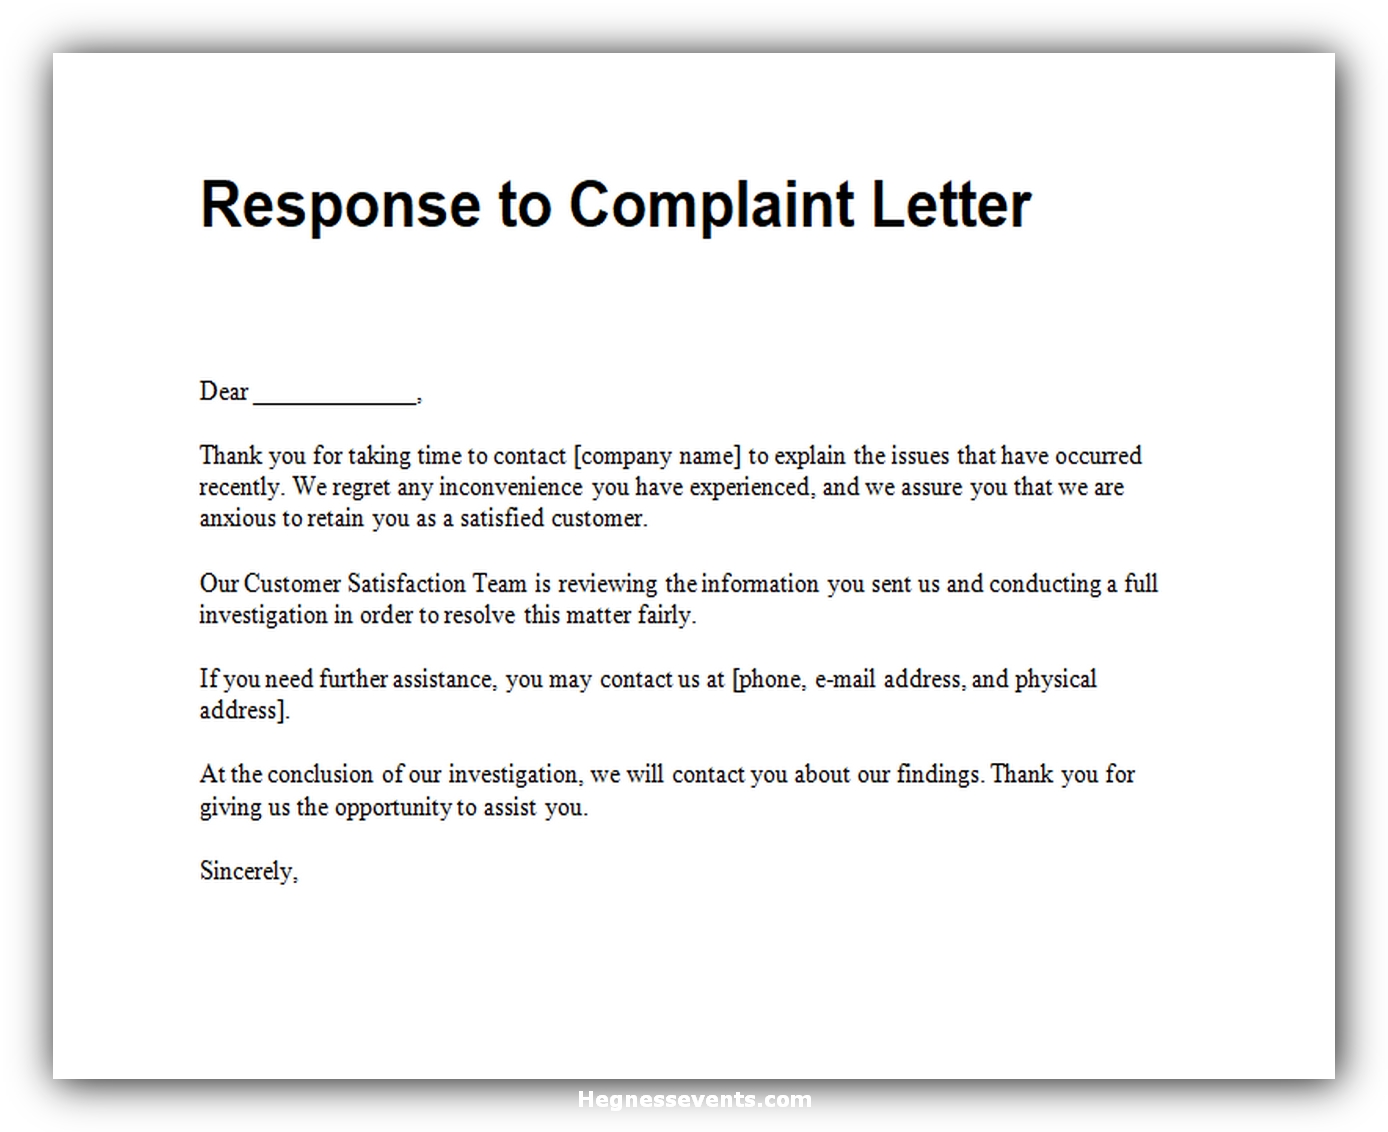 8-powerful-examples-of-response-to-complaint-letter-and-how-to-write-it